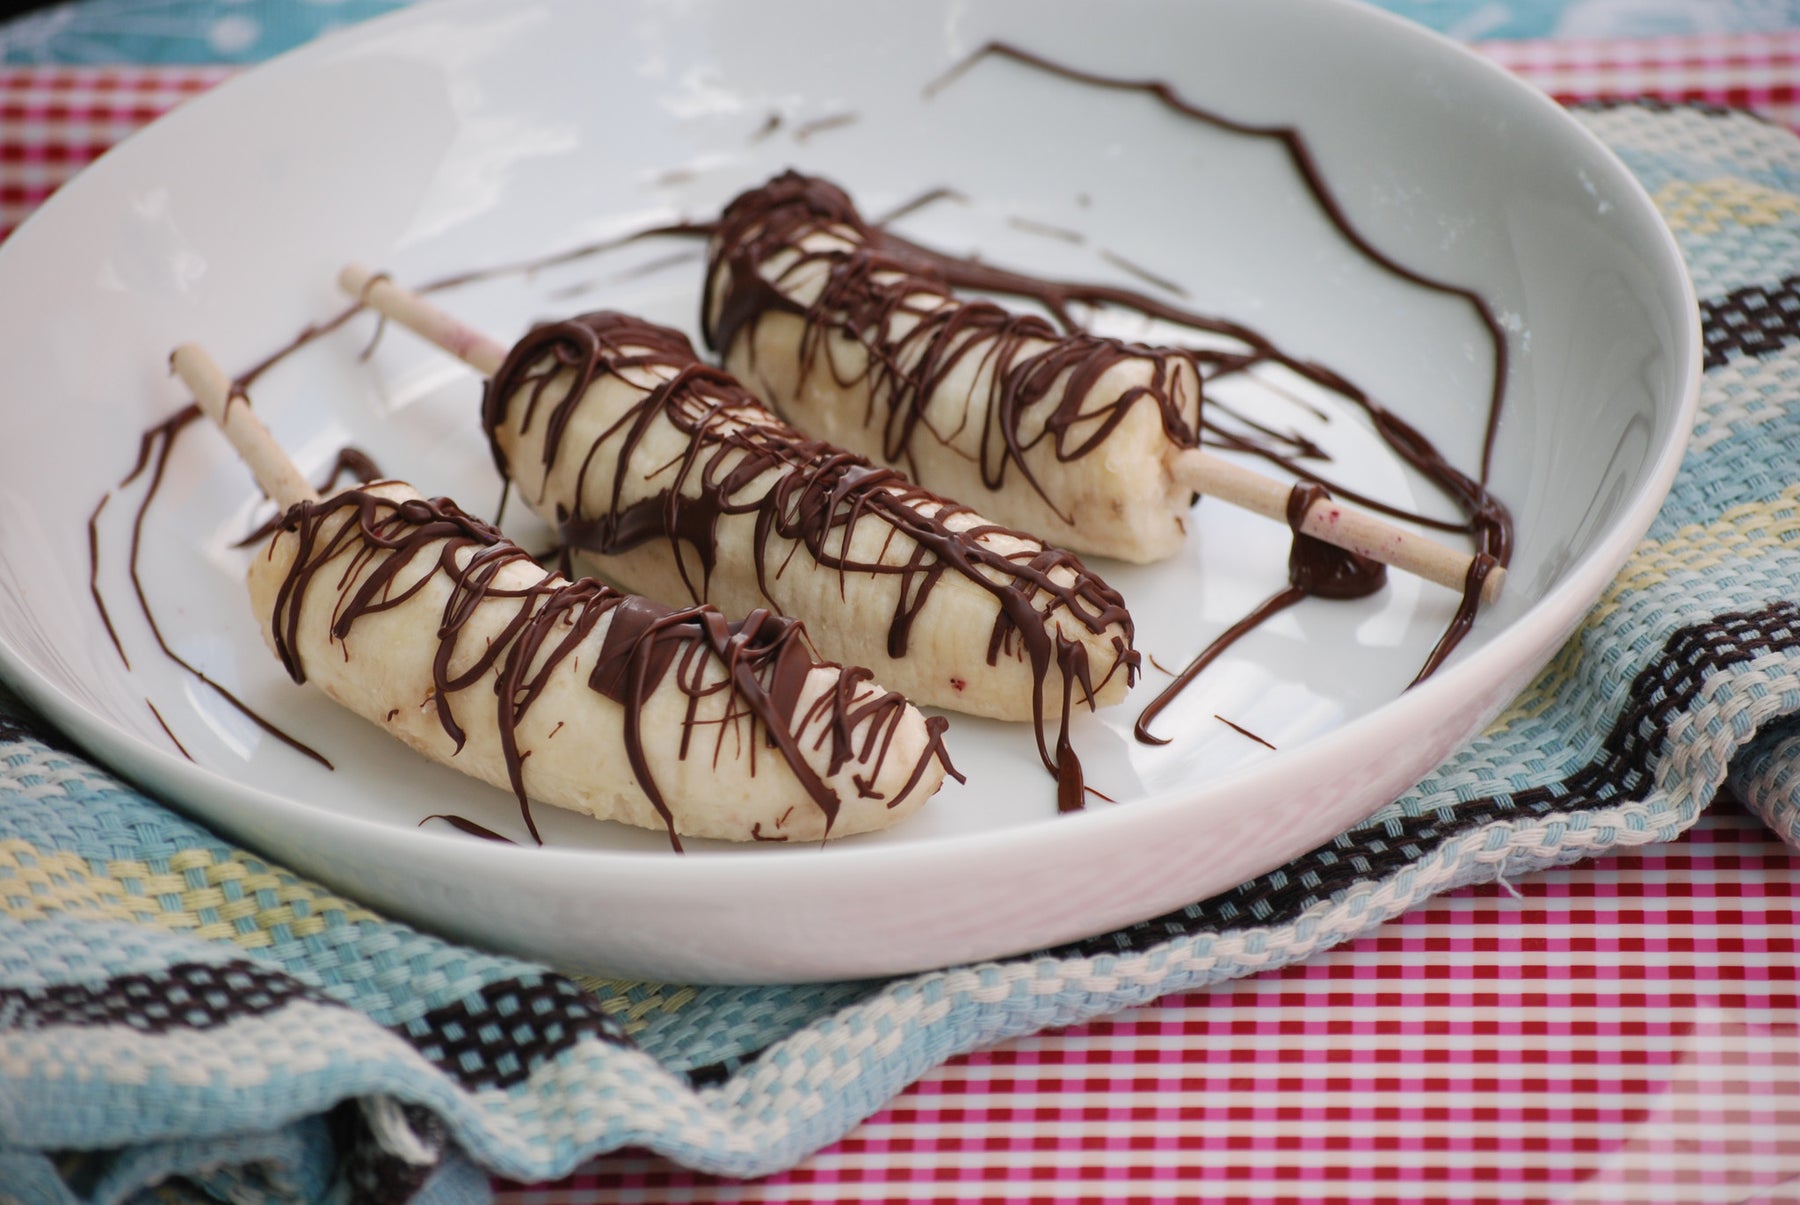 Frozen Banana Pops with Chocolate Drizzle